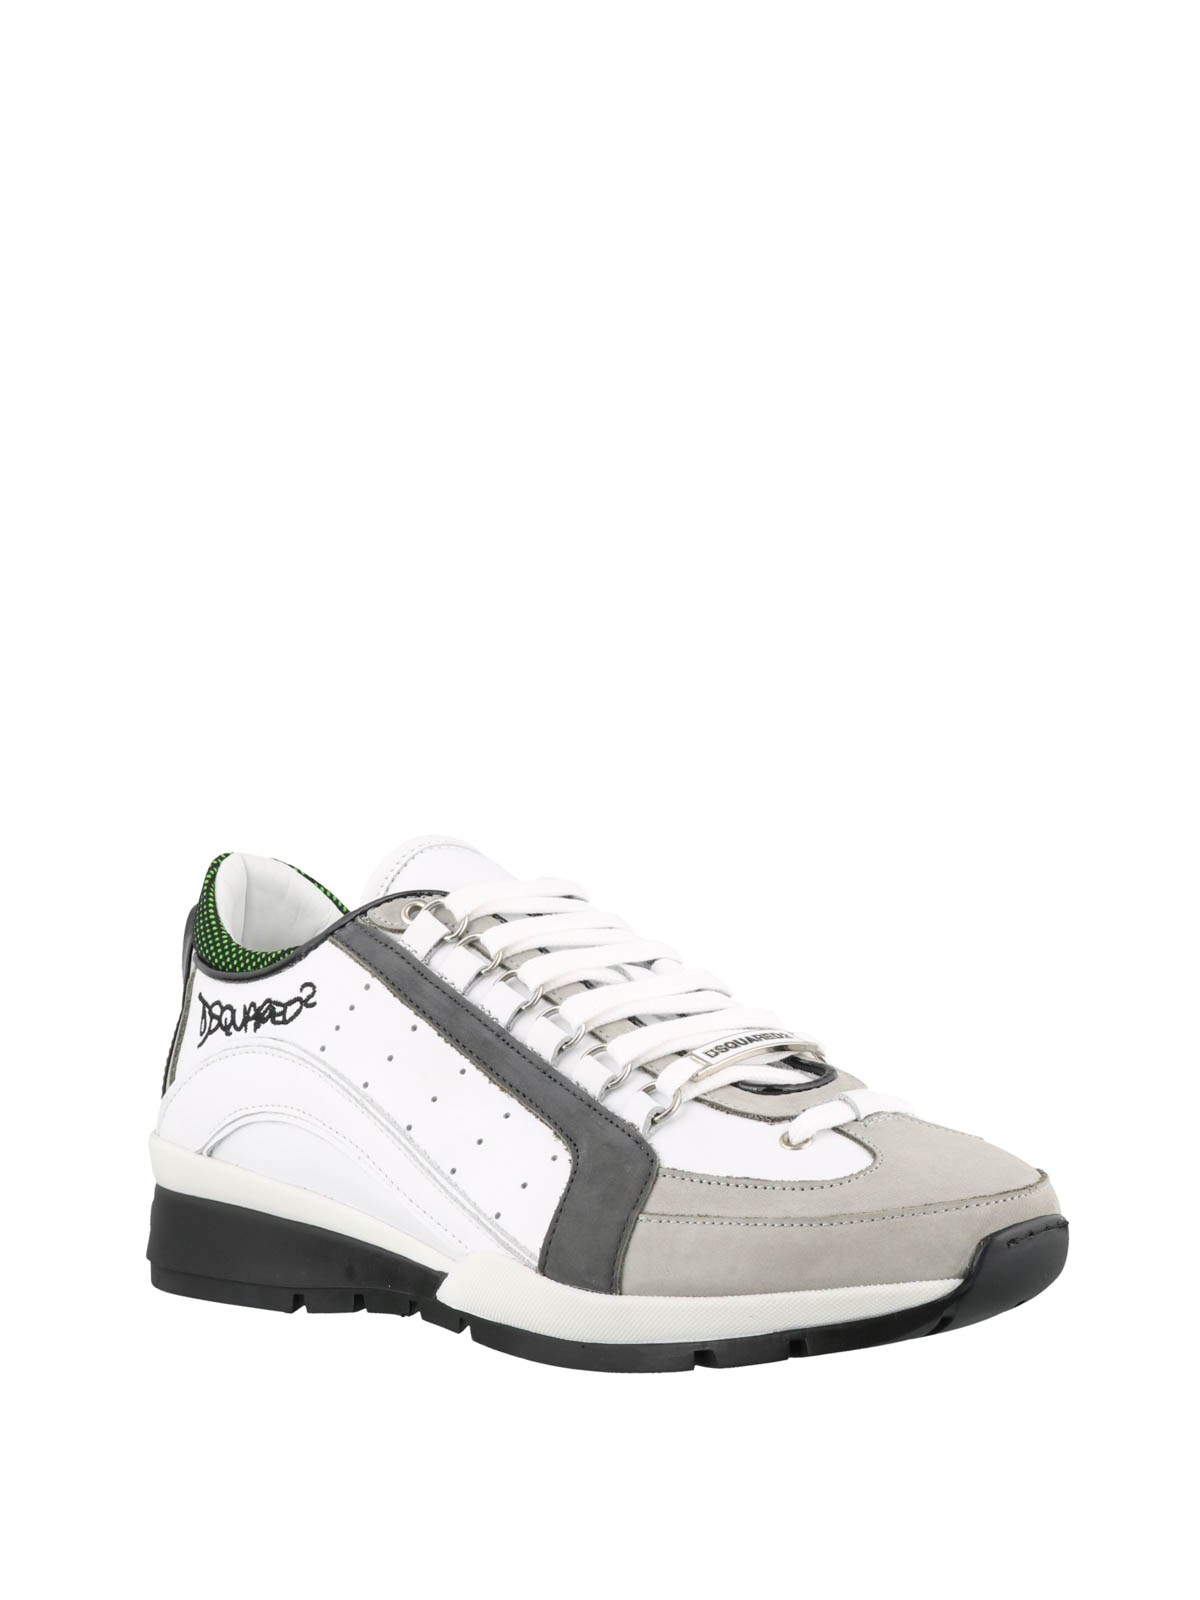 dsquared 551 trainers